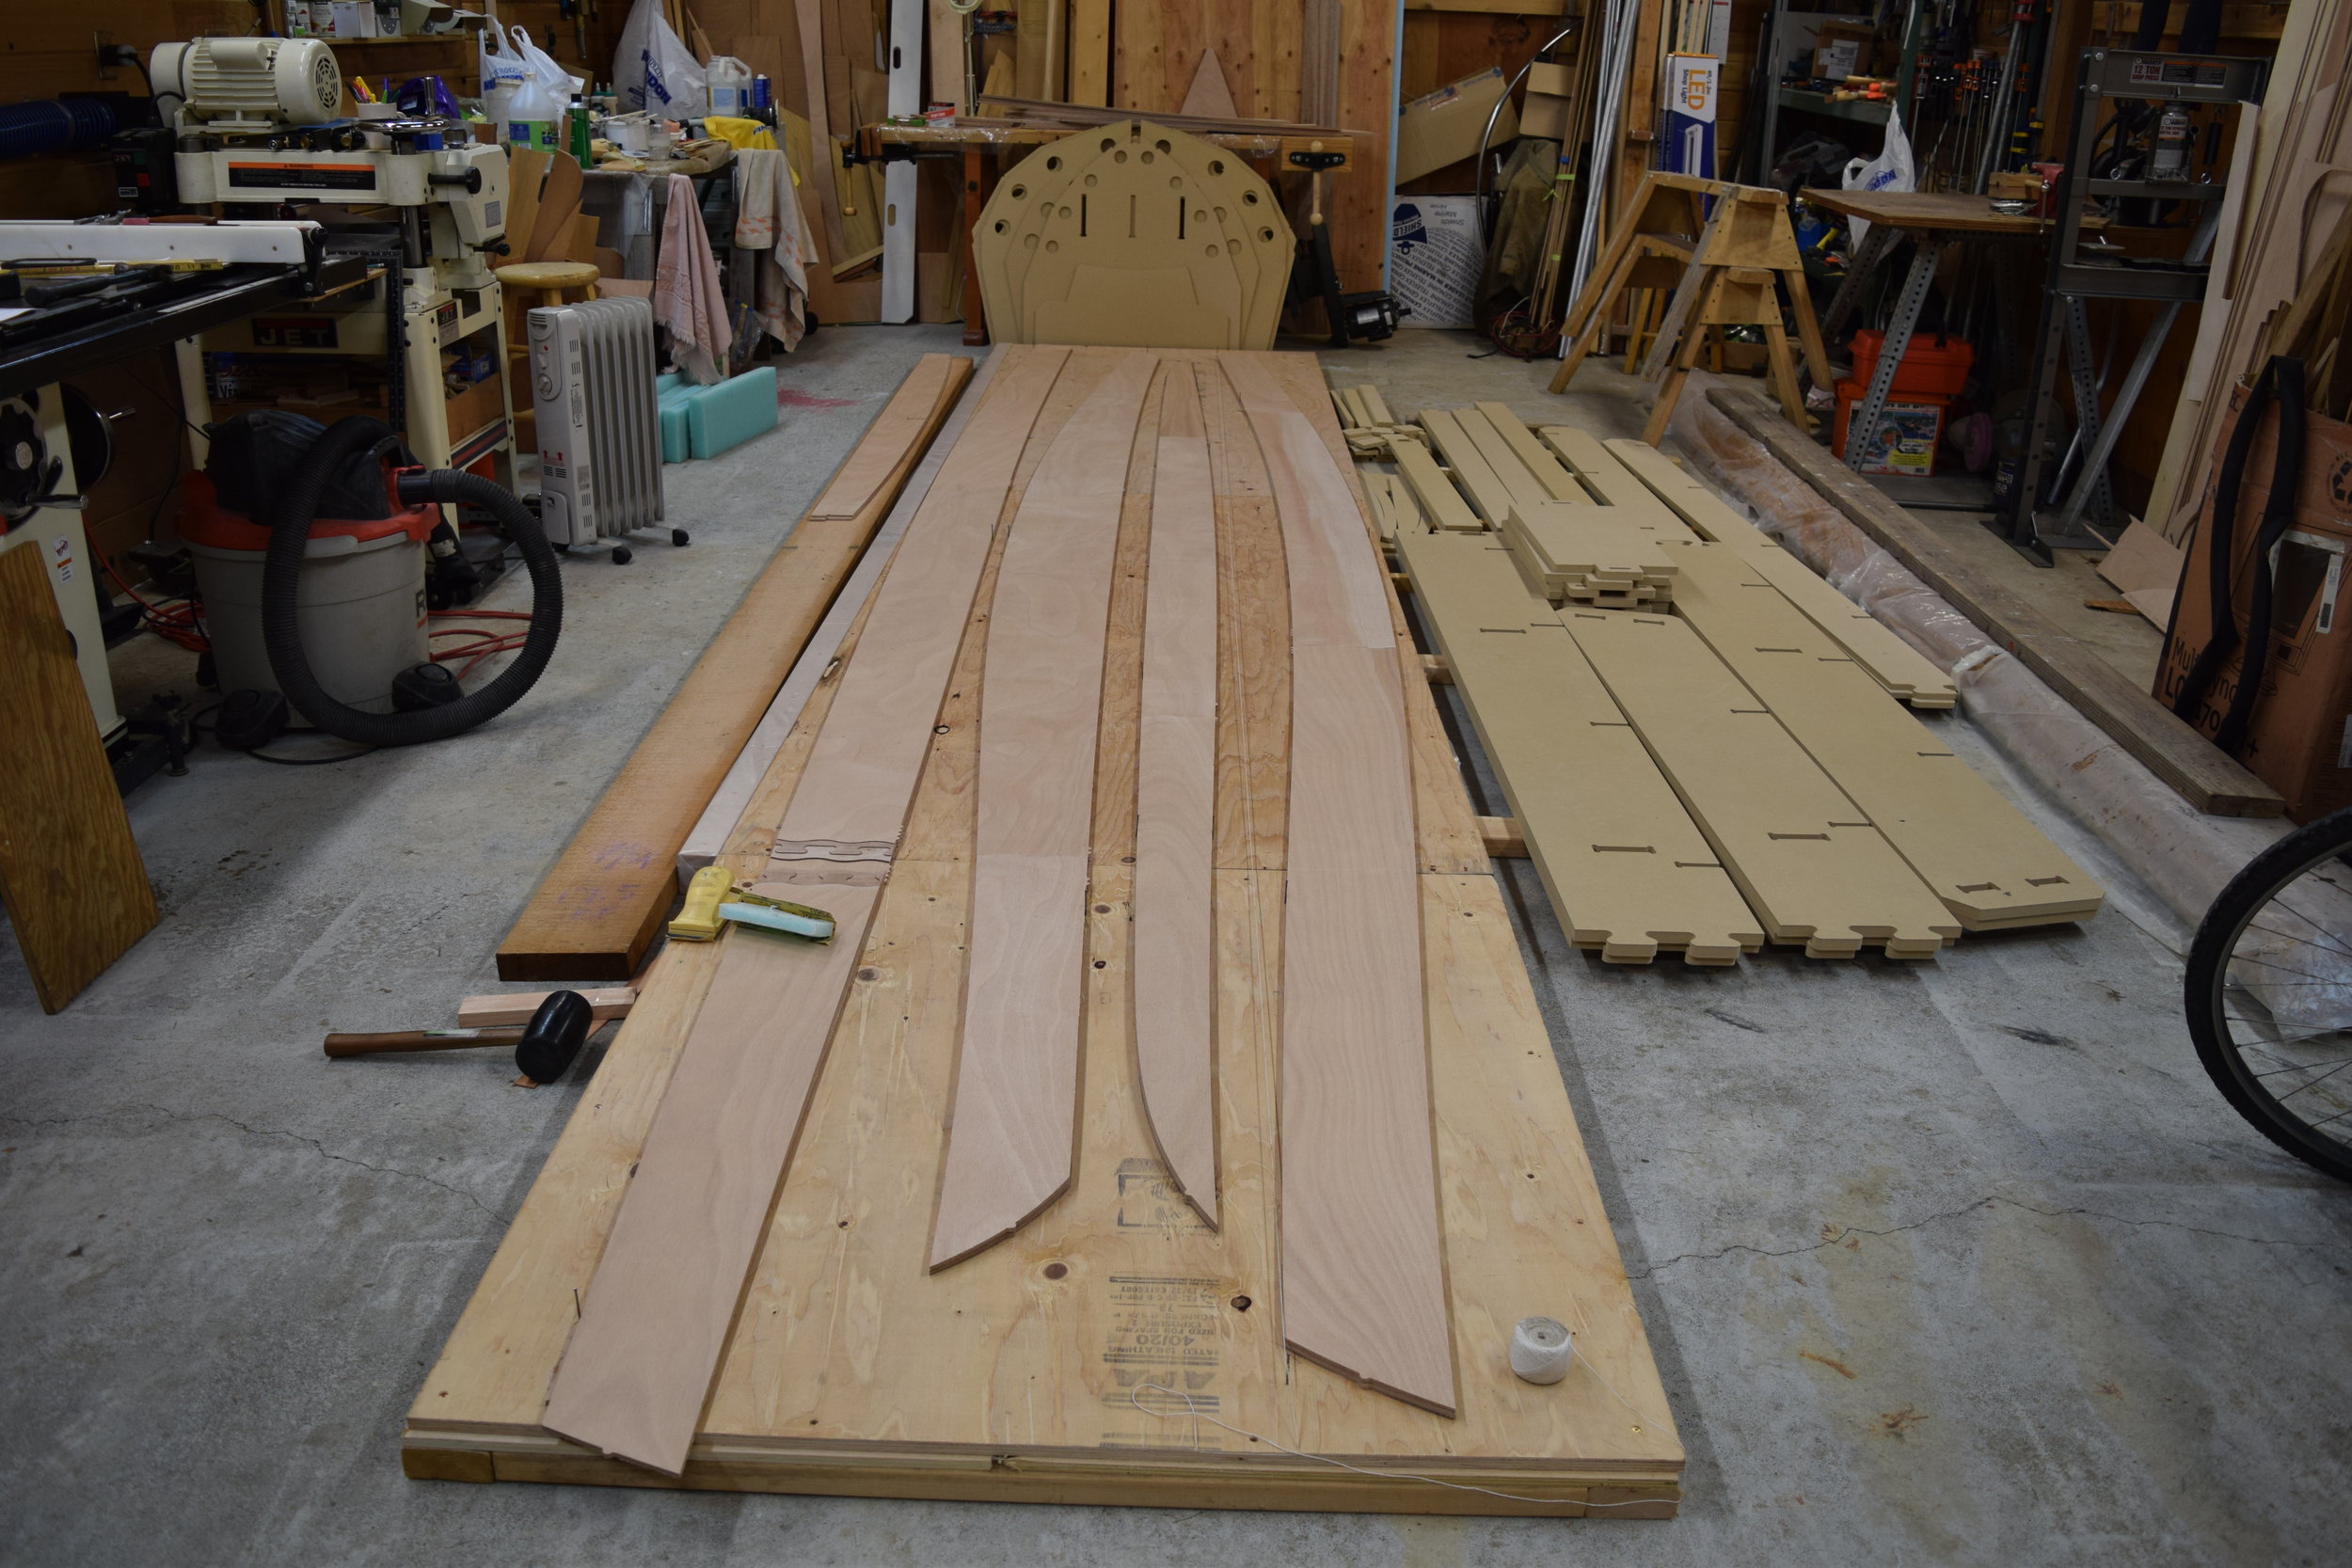 Planking being glued up in a shop